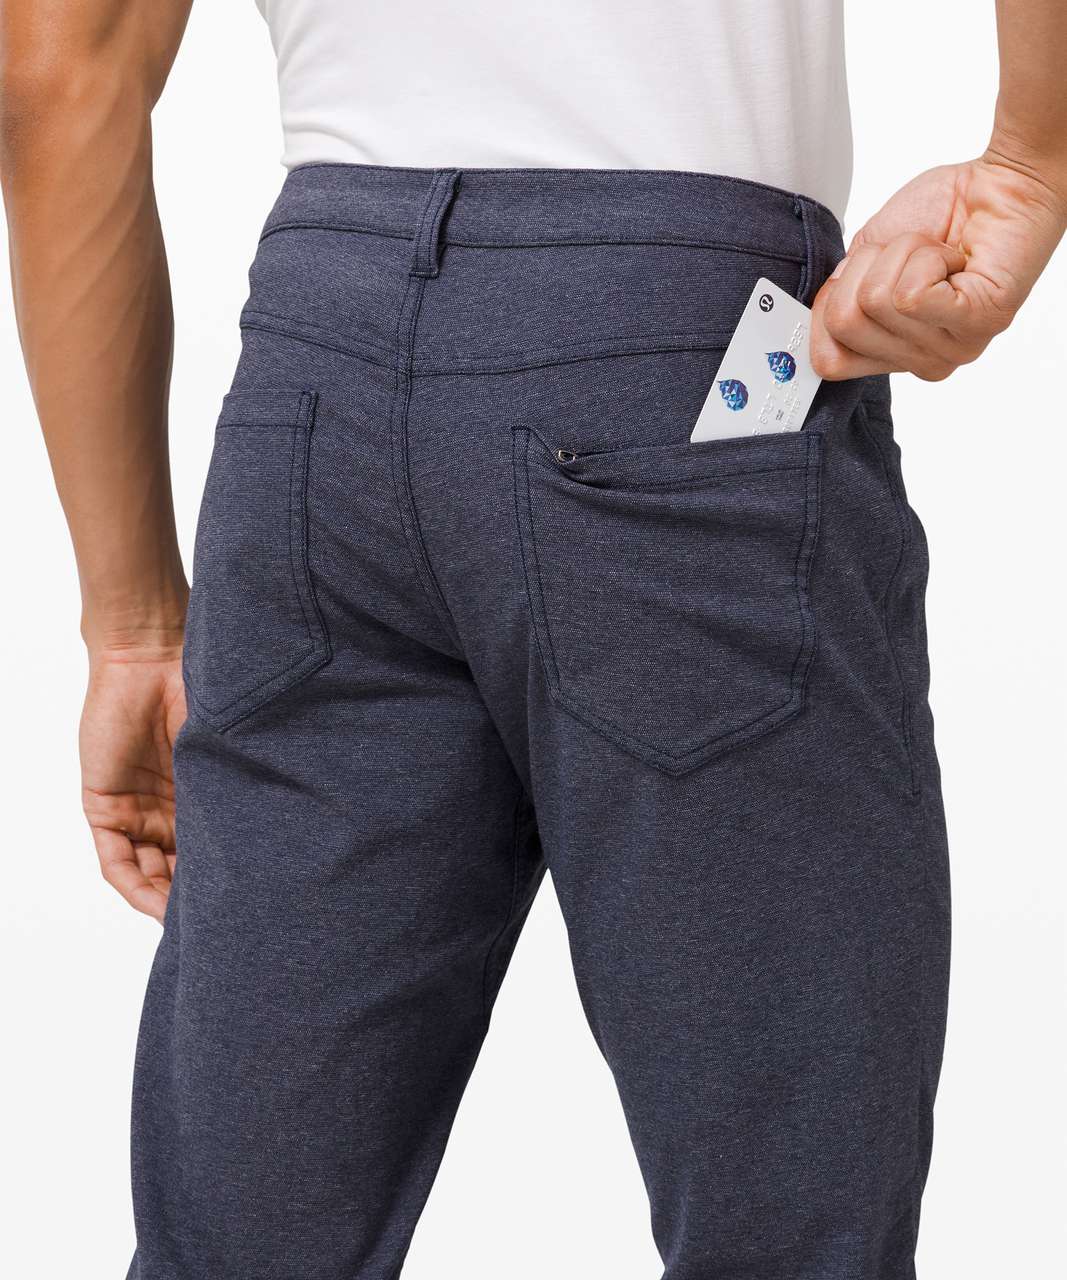 Lululemon ABC Pant Skinny *Tech Canvas 34" - Heathered Deep Navy (First Release)